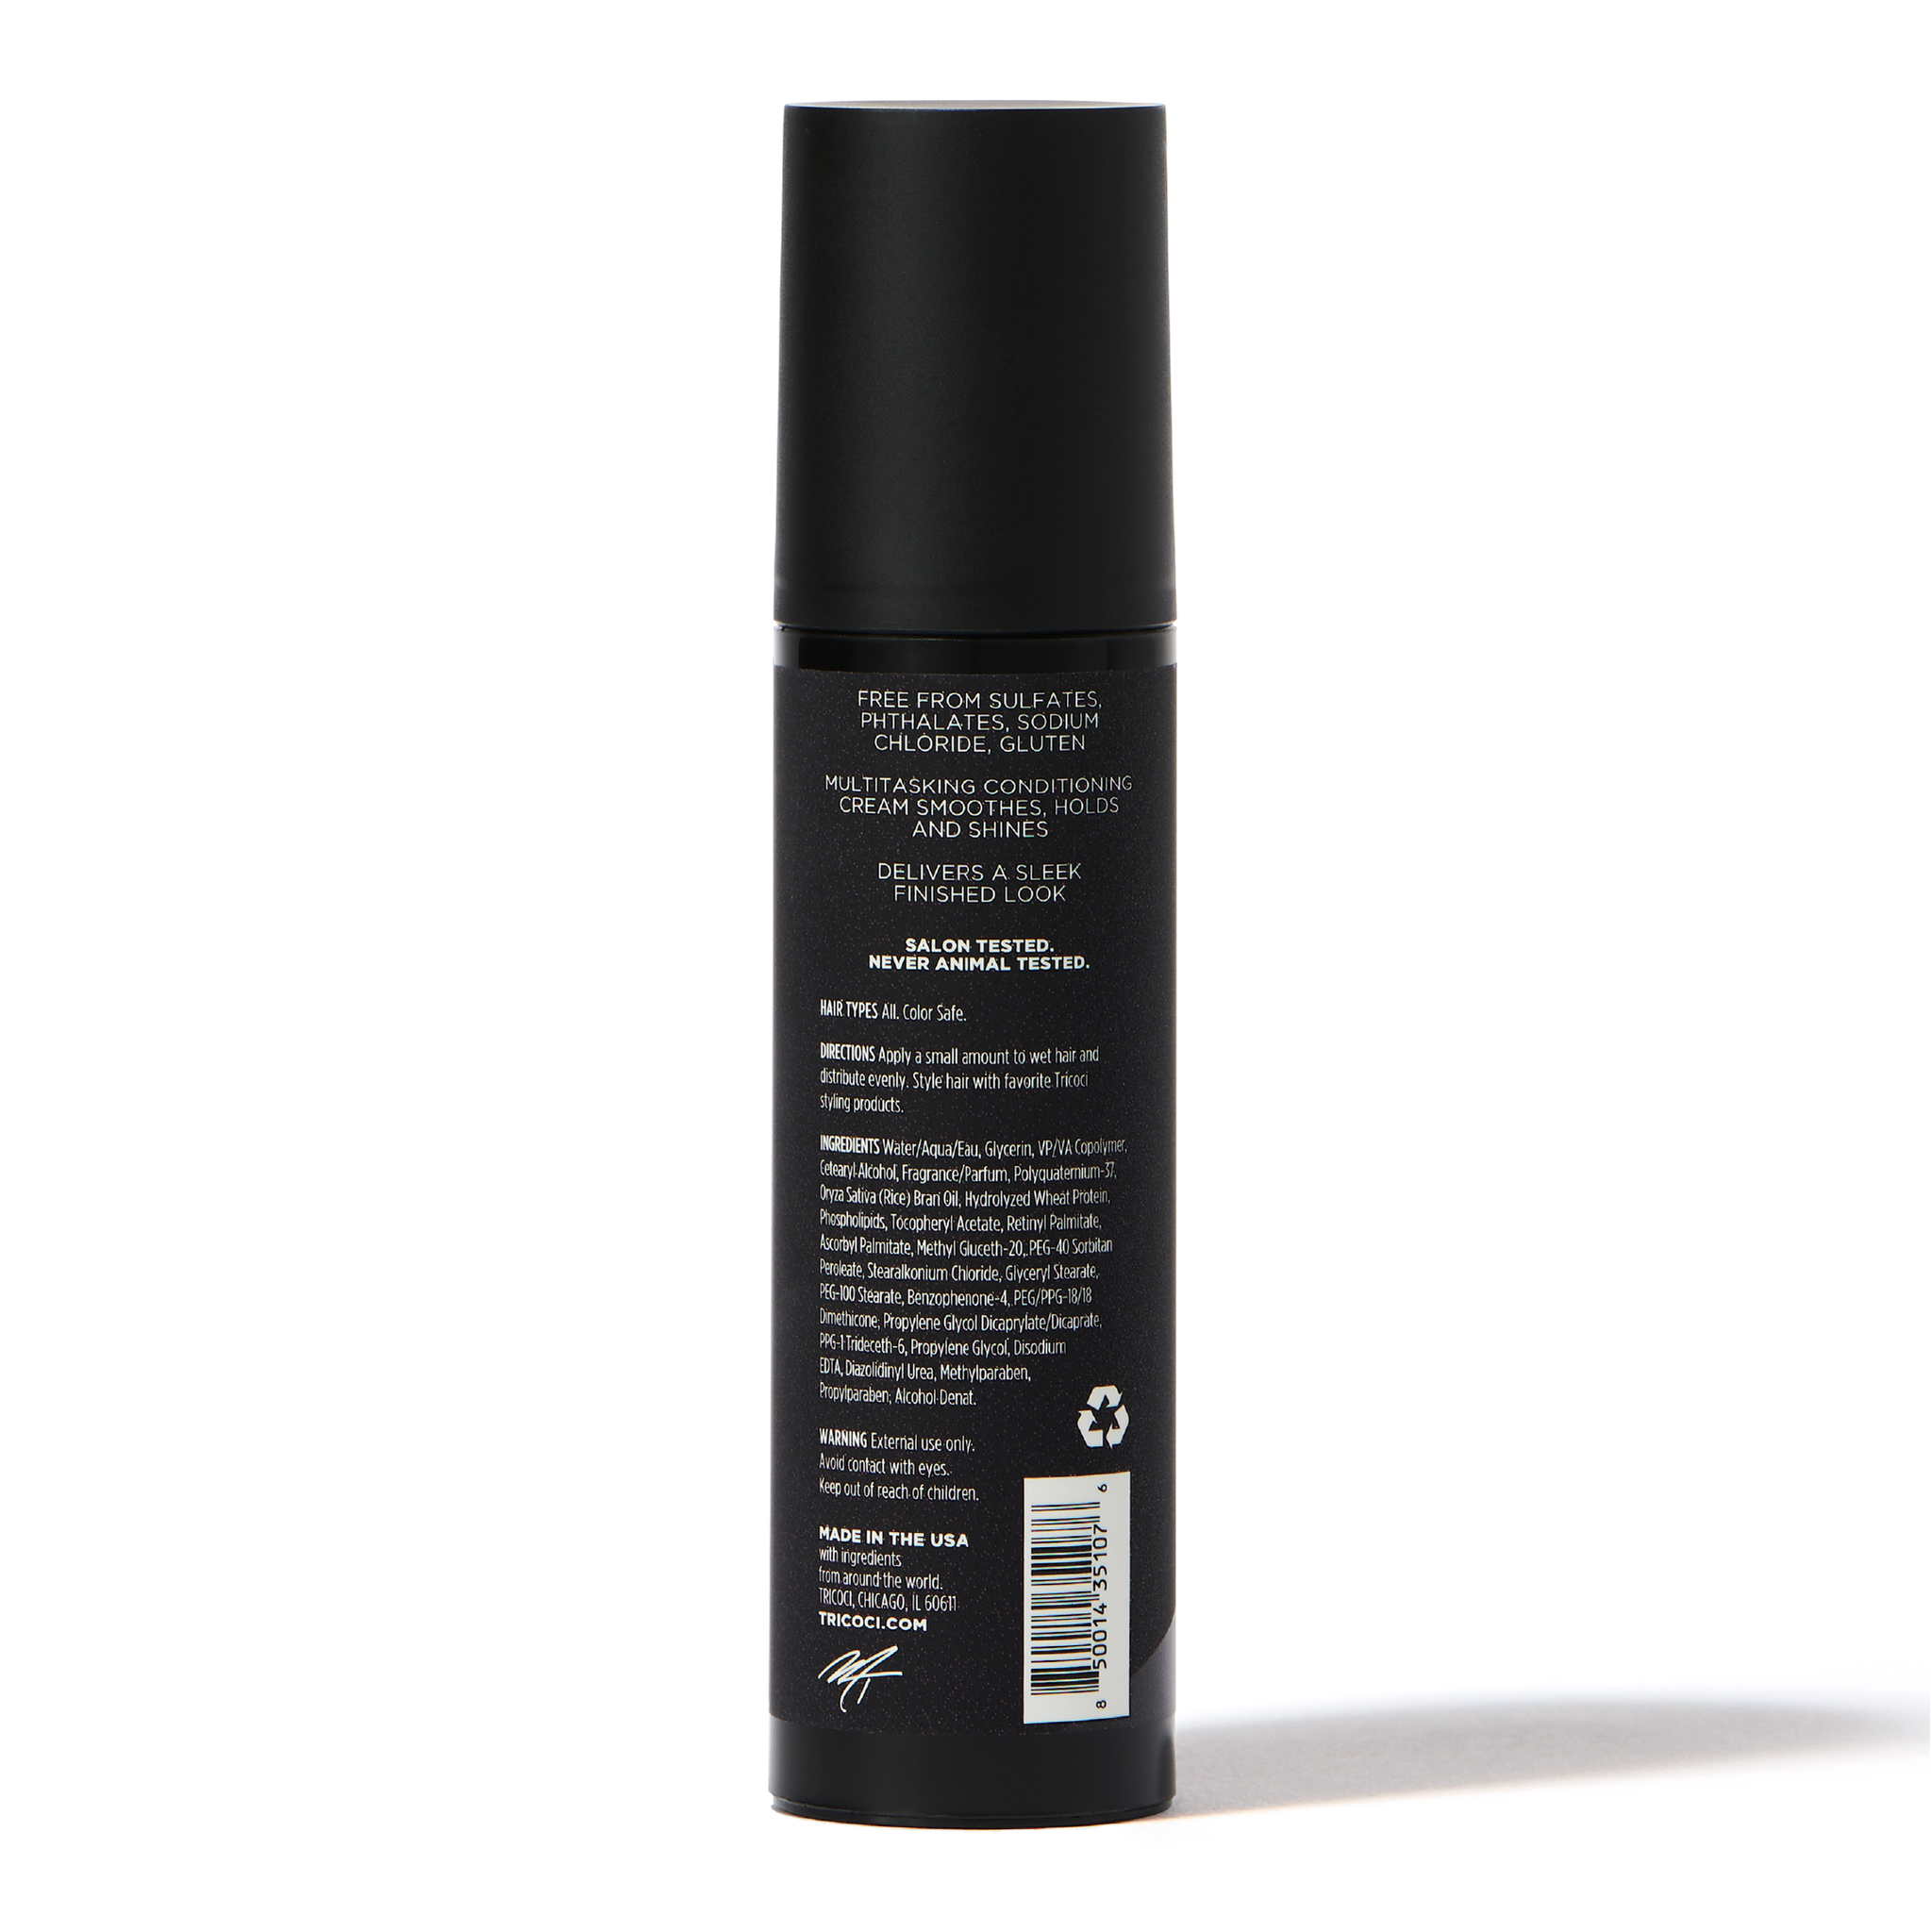 Back of bottle - Tricoci Collection 3P1 Styling Cream, Free From Sulfates, Phthalates, Sodium Chloride, Gluten